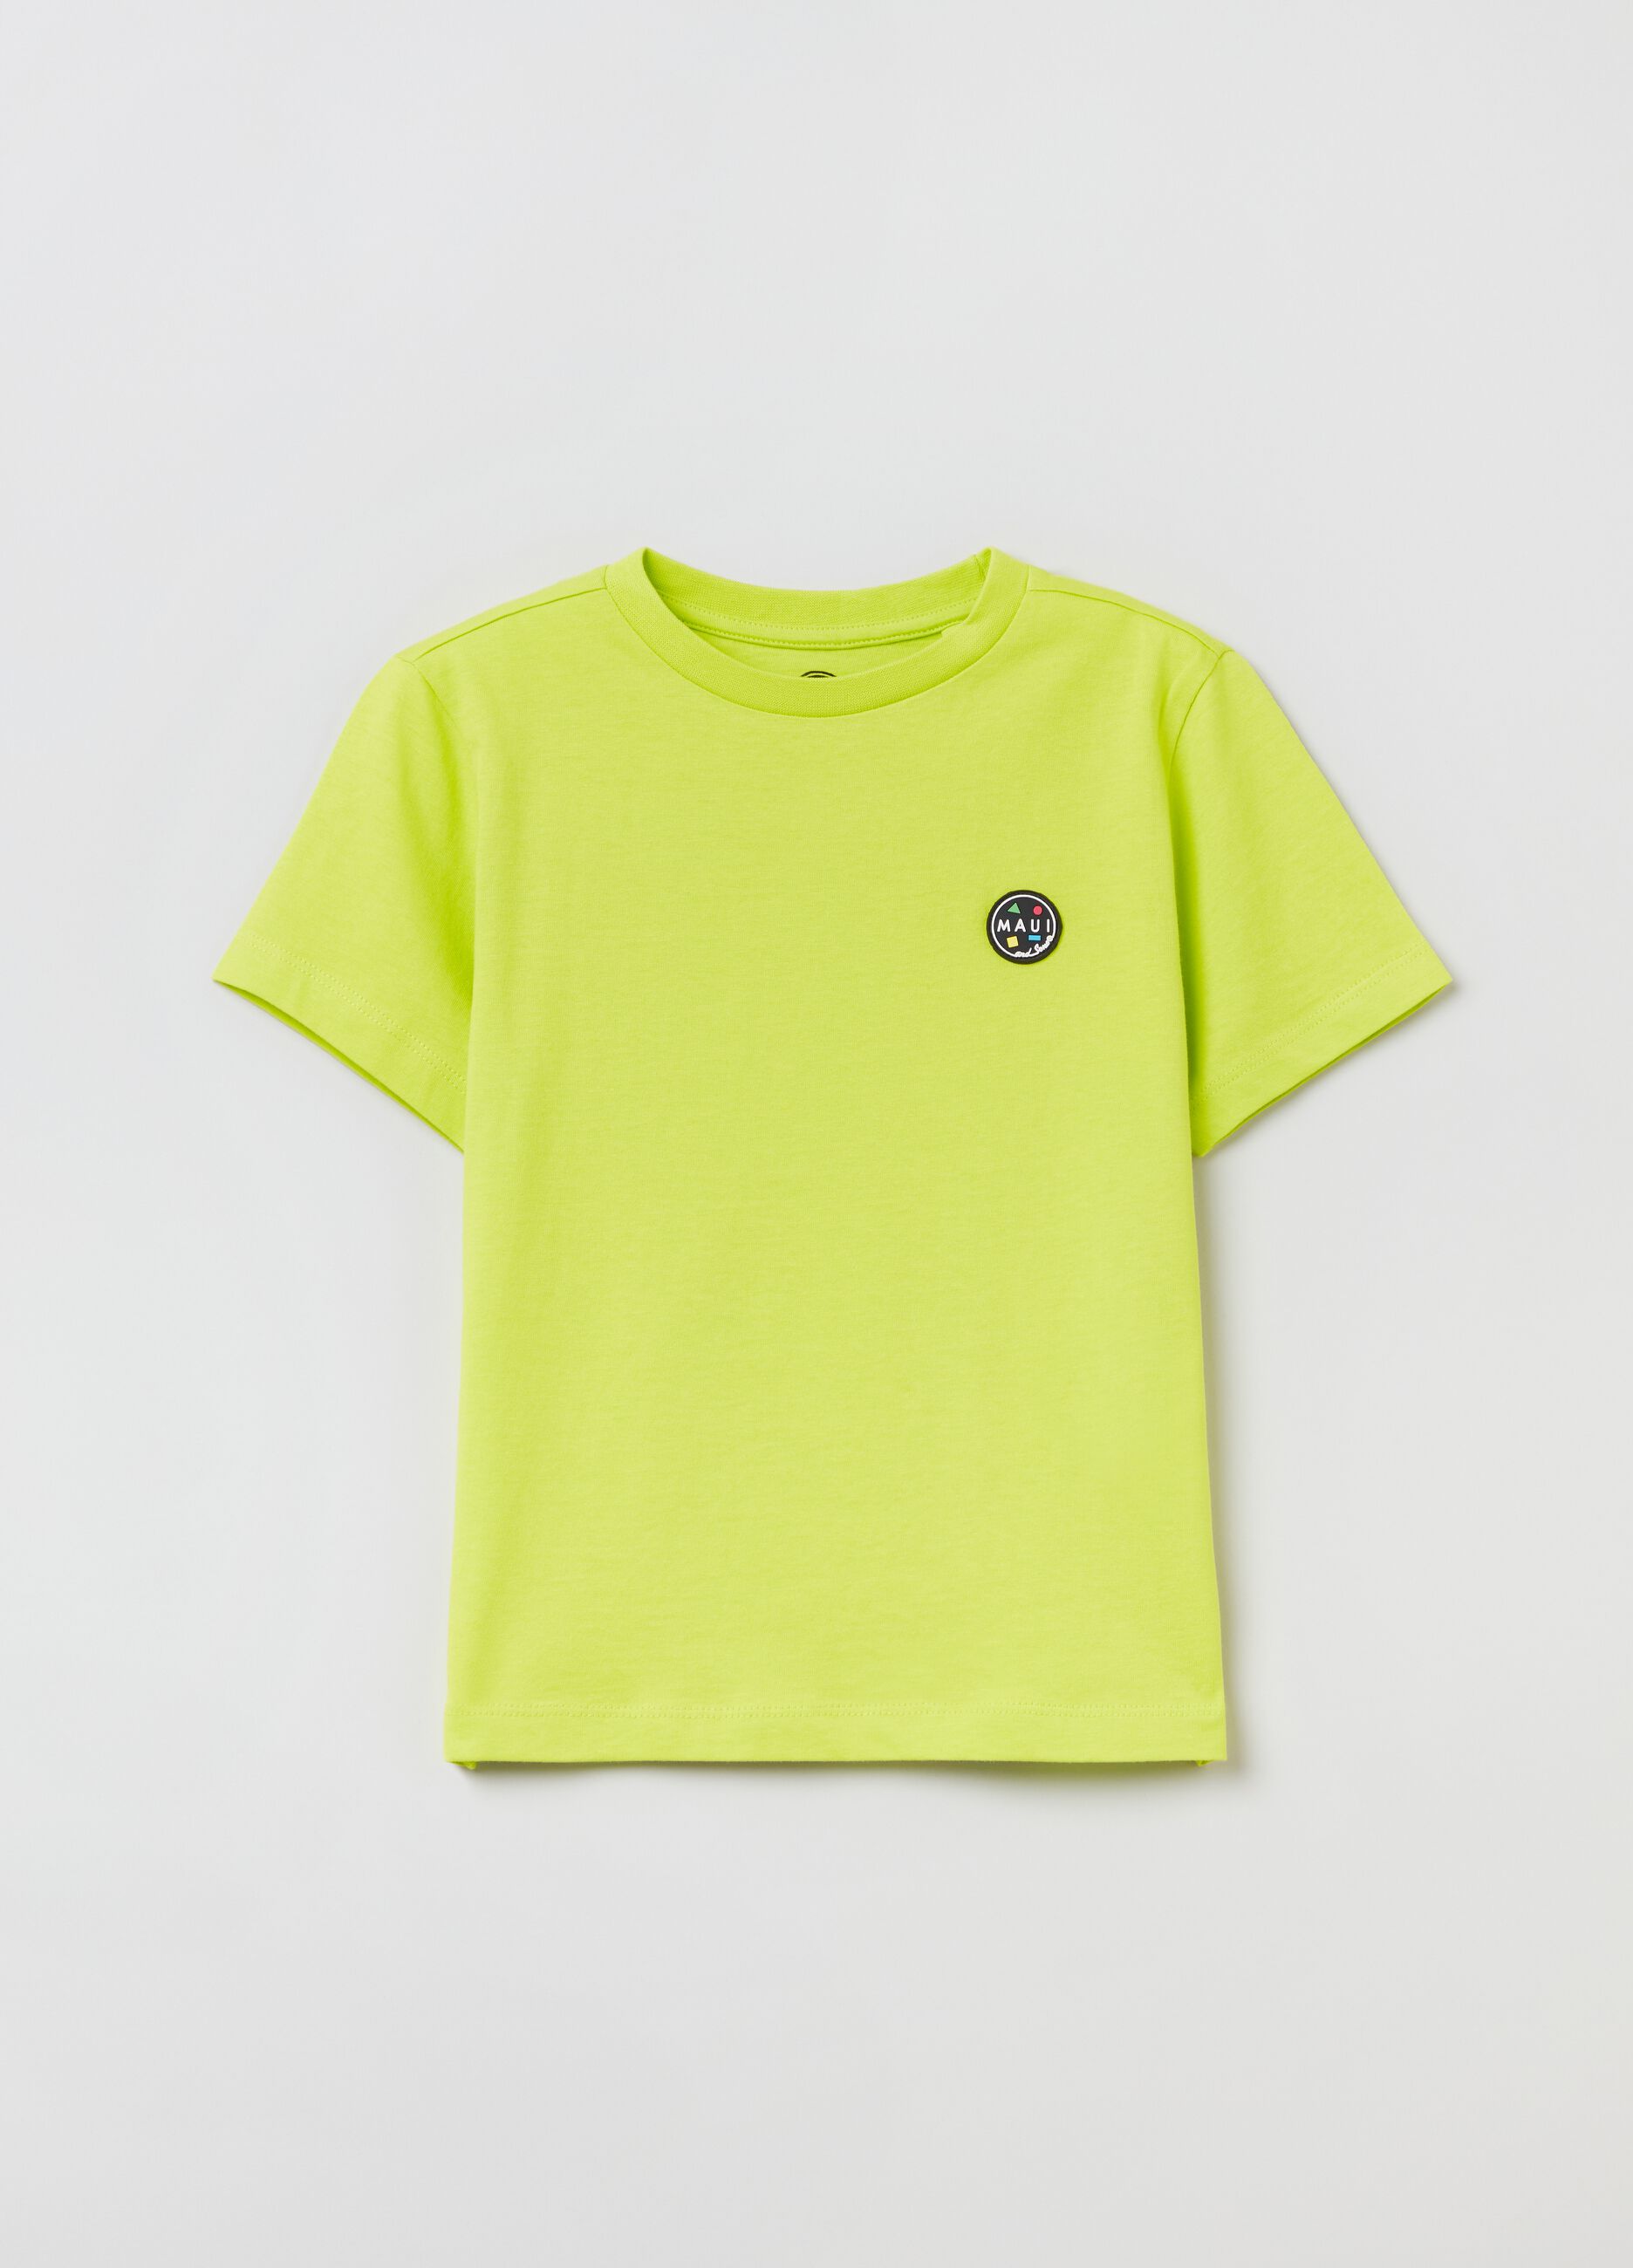 T-shirt with Maui and Sons logo patch